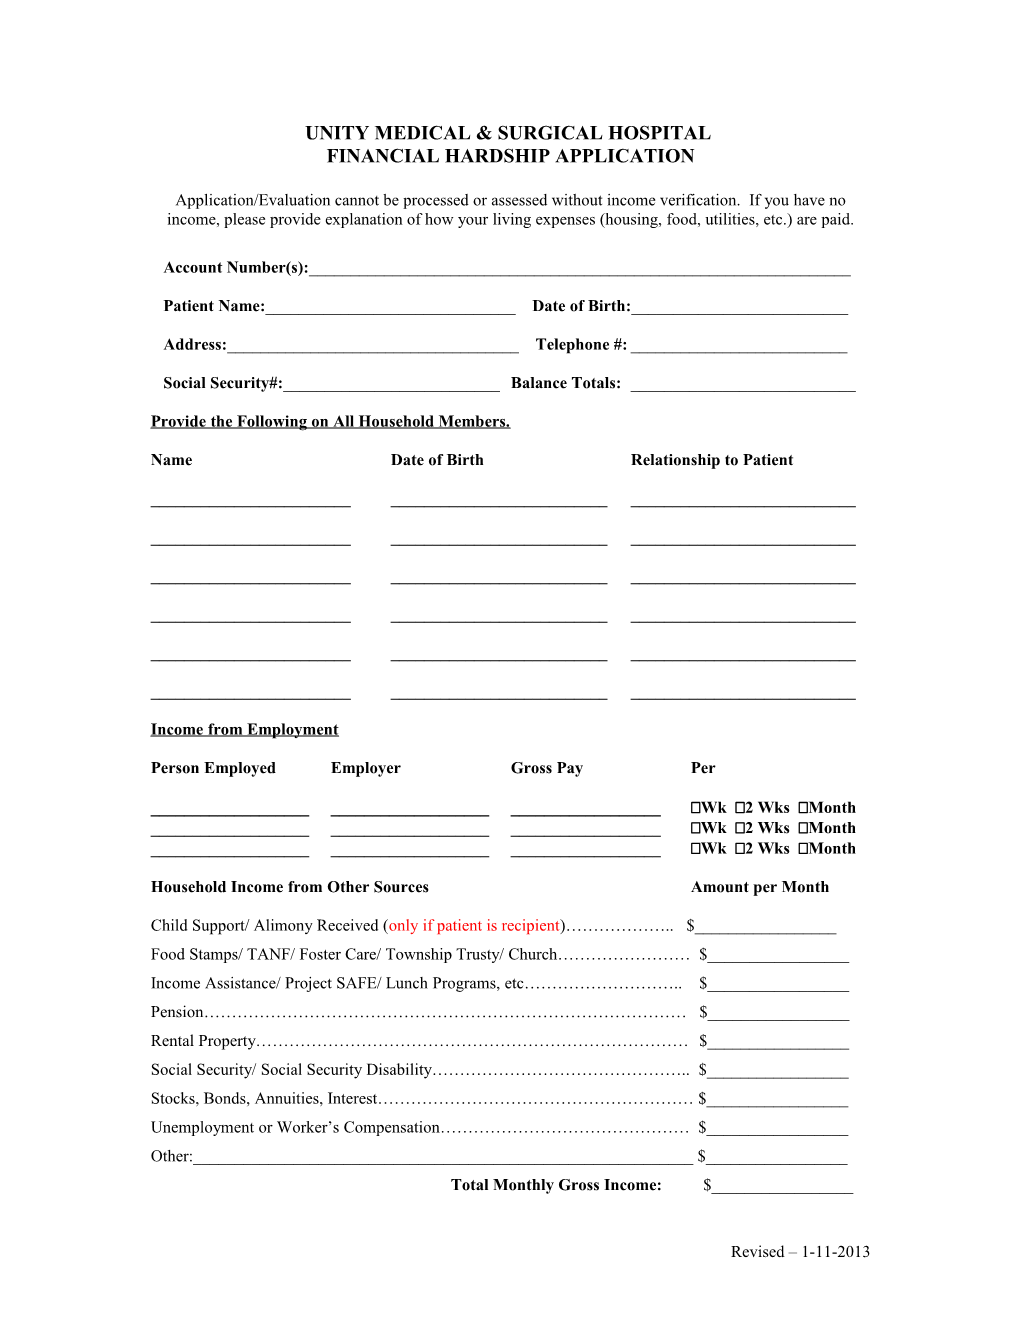 Unity Medical & Surgical Hospital Financial Assistance Application